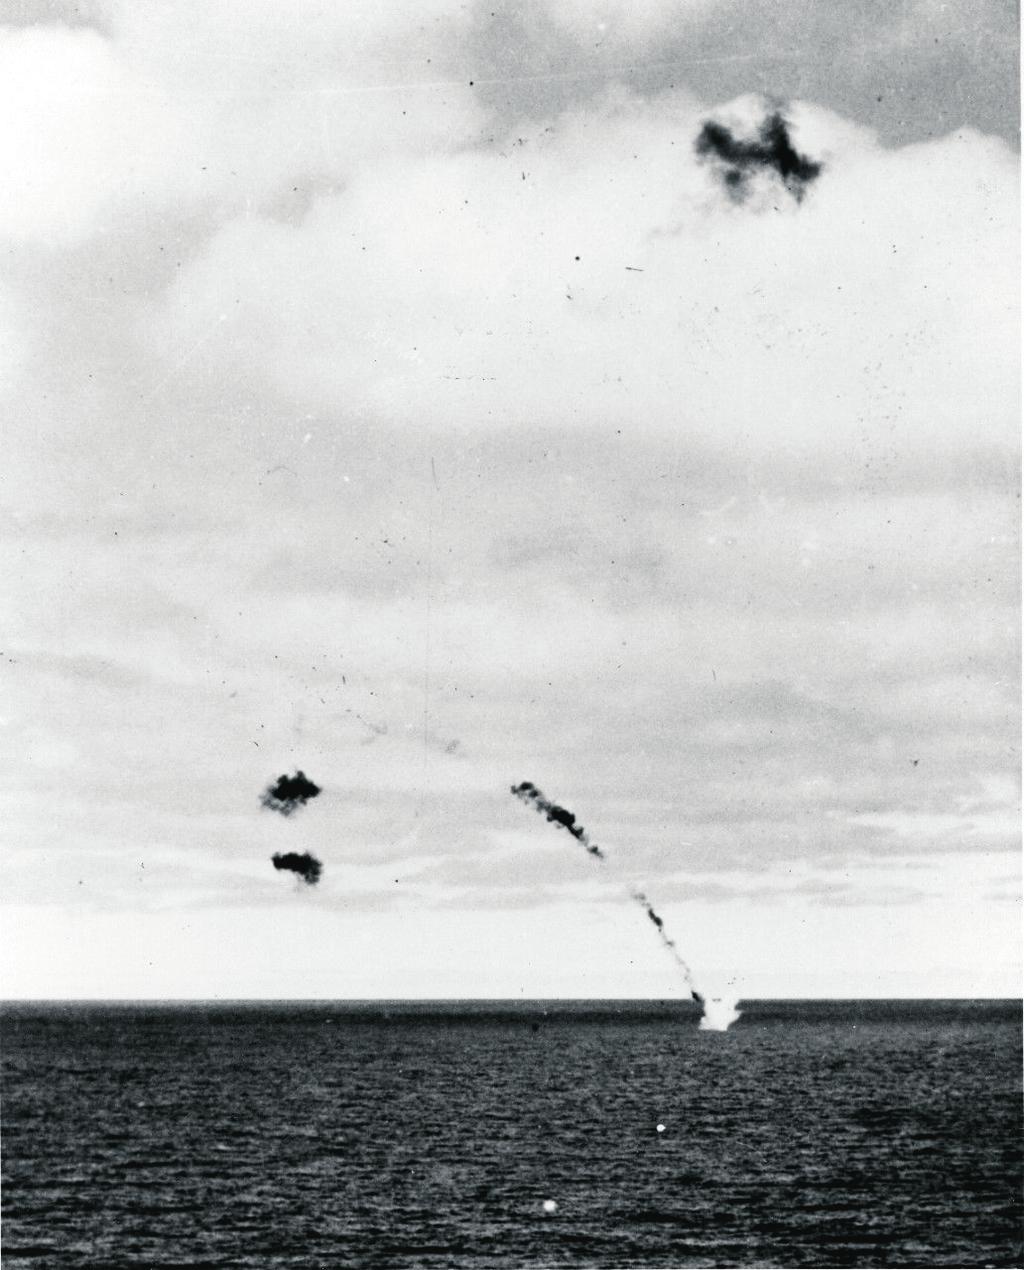 Activity: Making a Difference: Service & Sacrifice At The Battle Of Midway Document Group B Photograph, A Japanese Type 97 shipboard attack aircraft is shot down while attempting to deliver a torpedo